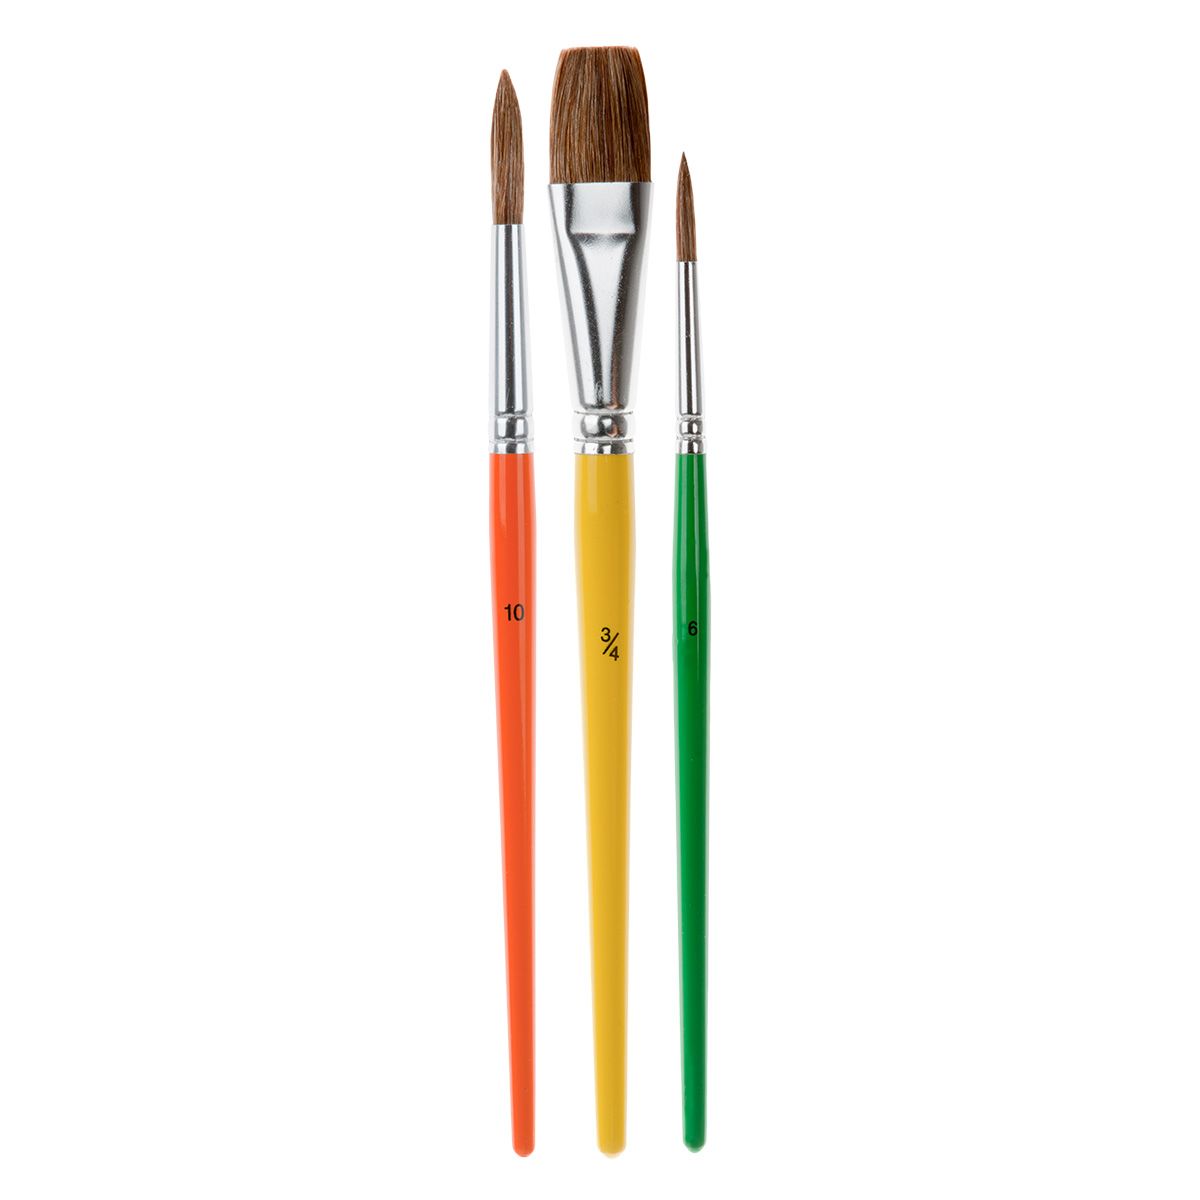 3 quality kids paint brushes in sizes 6 & 10 Round and 3/4" Flat